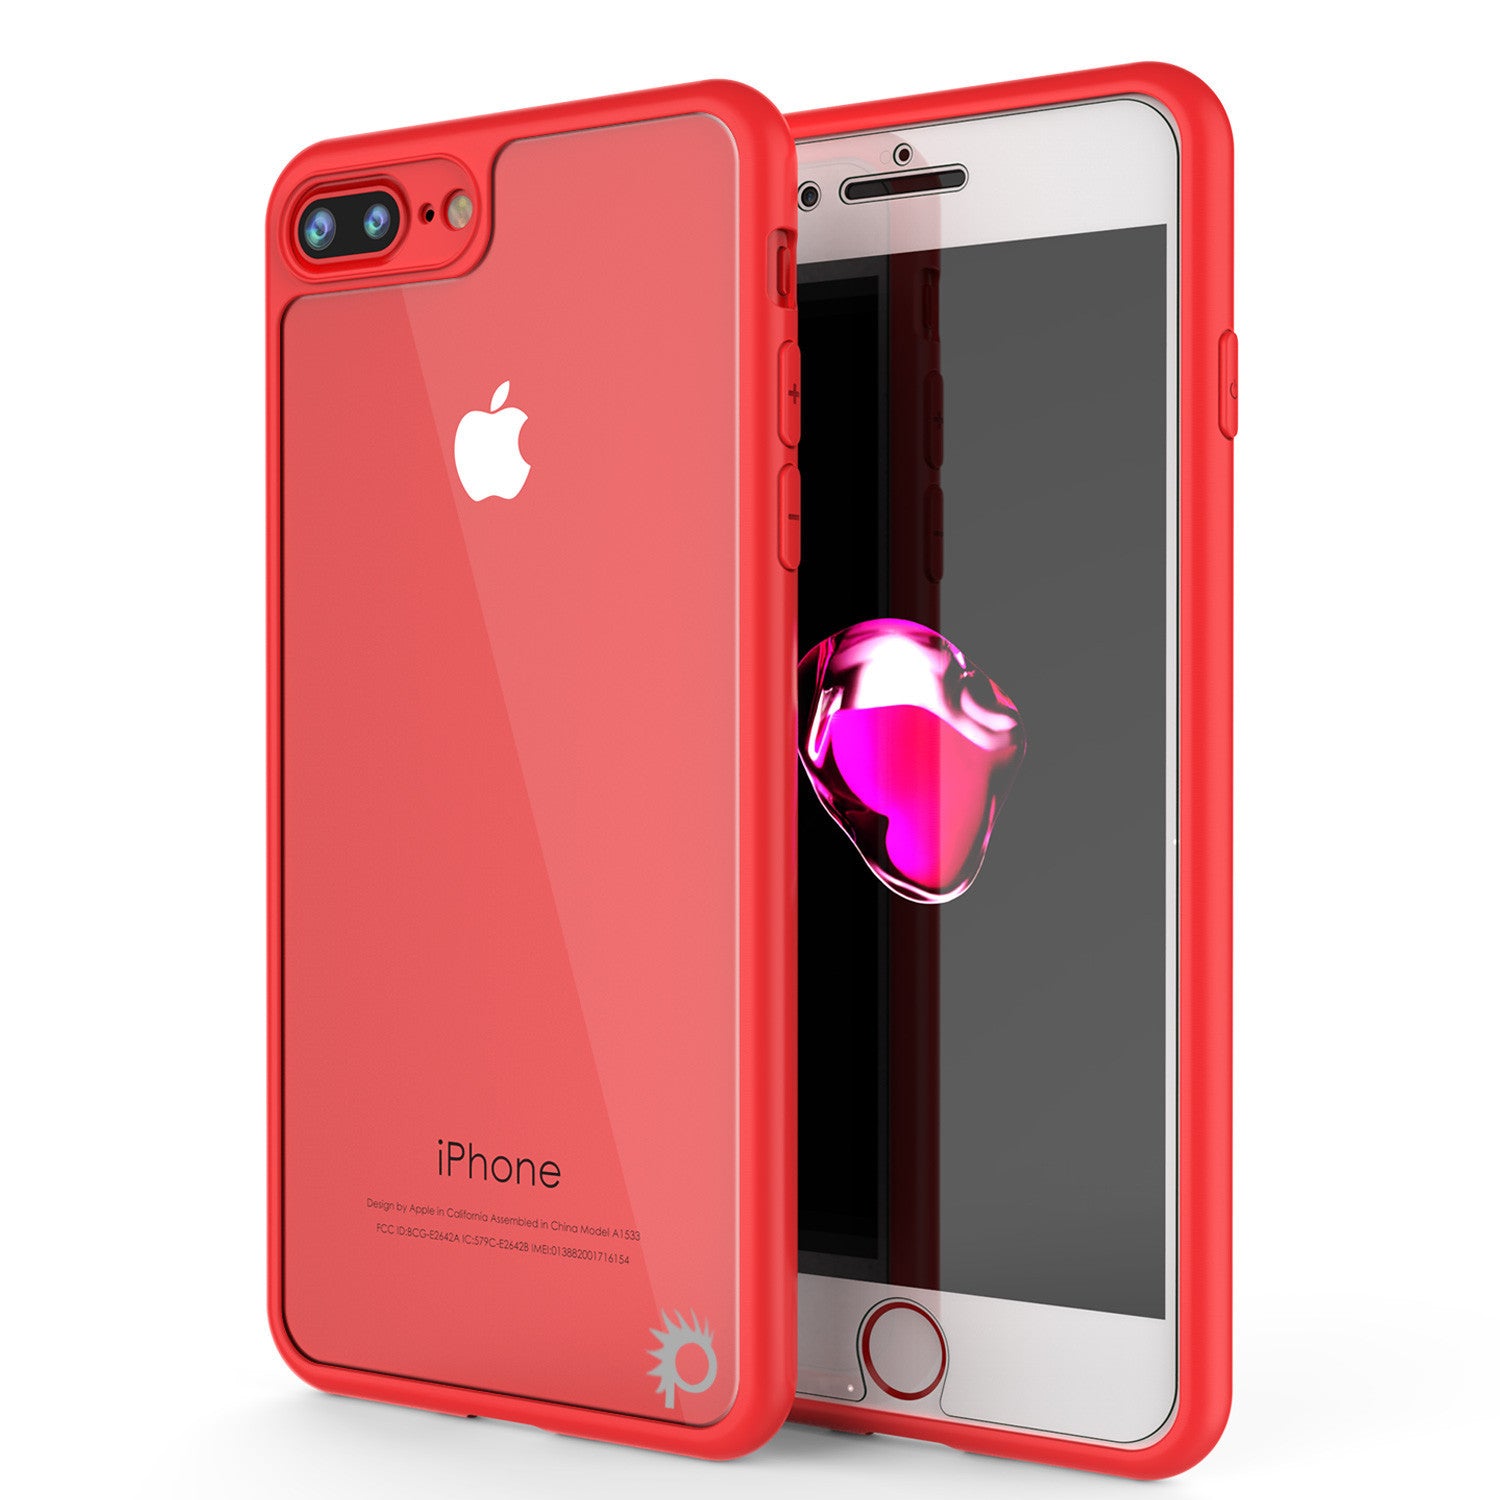 iPhone 7 PLUS Case [MASK Series] [RED] Full Body Hybrid Dual Layer TPU Cover  W/ protective Tempered Glass Screen Protector